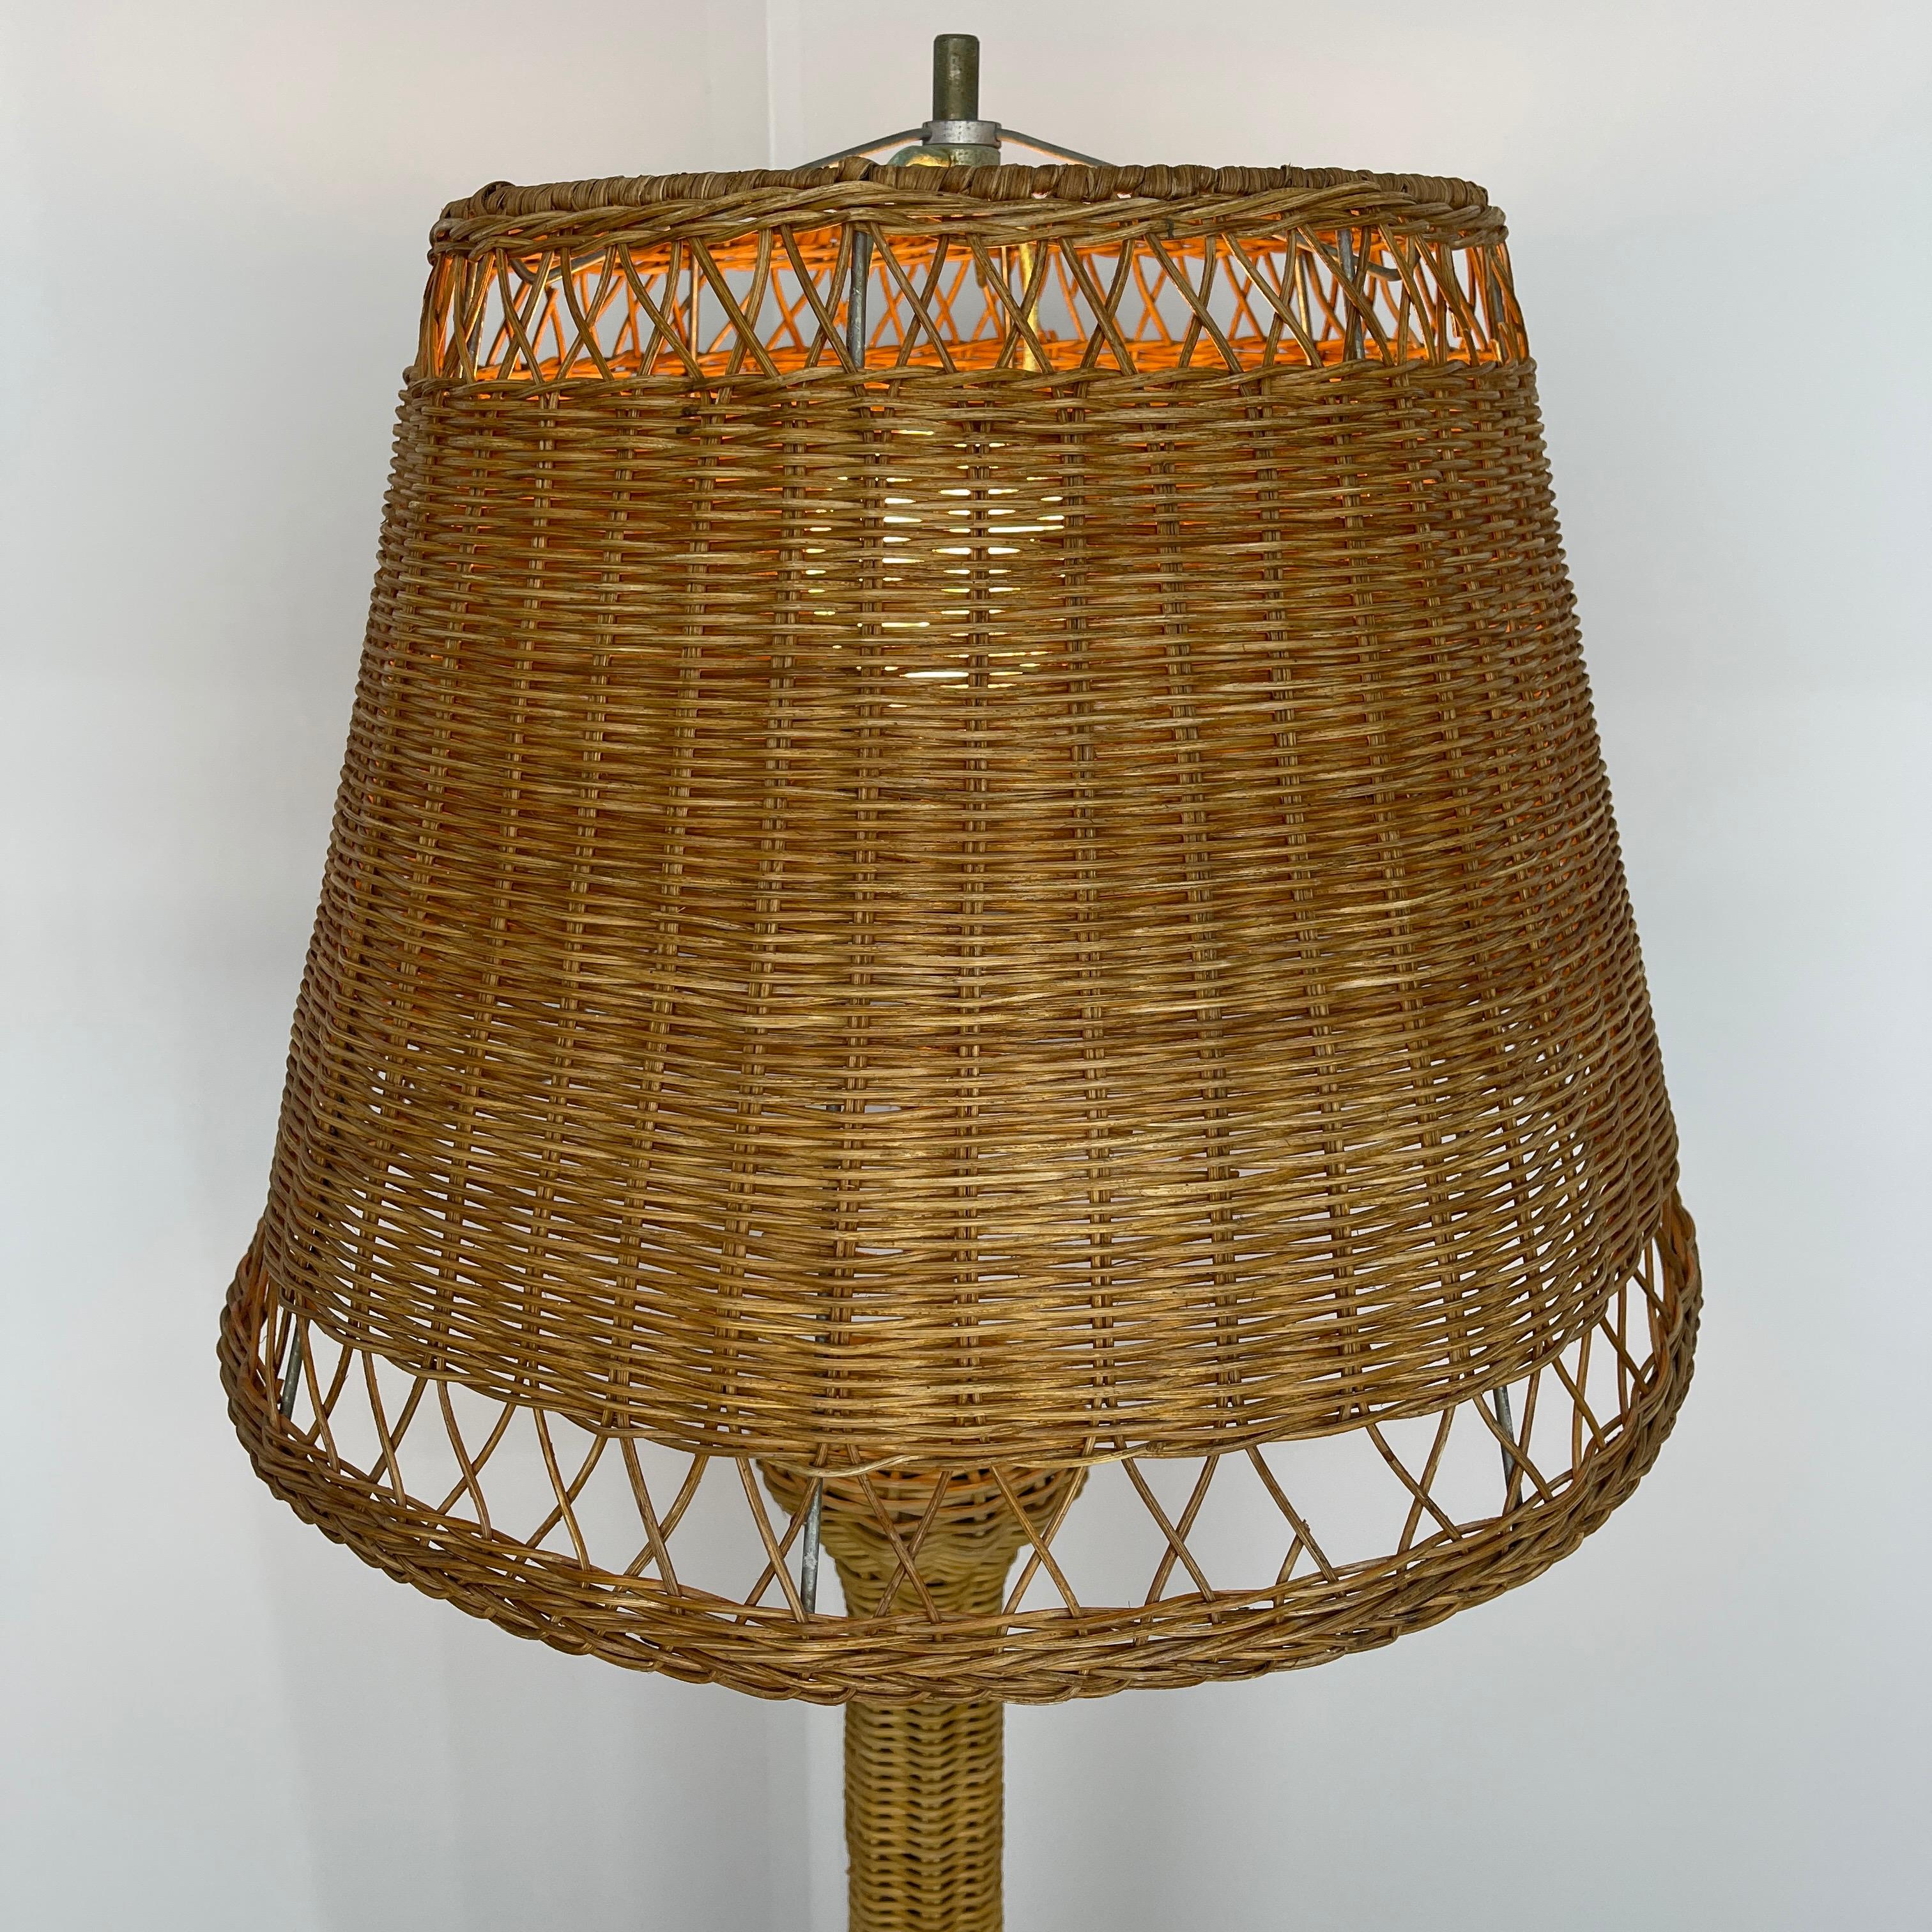 Tall wicker floor lamp with woven wicker shade. This iconic Mid-Century Modern lamp is perfect for the vintage styled room as well as a patio or porch. The light glows through the wicker shade making the lamp perfect for mood lighting in any room.